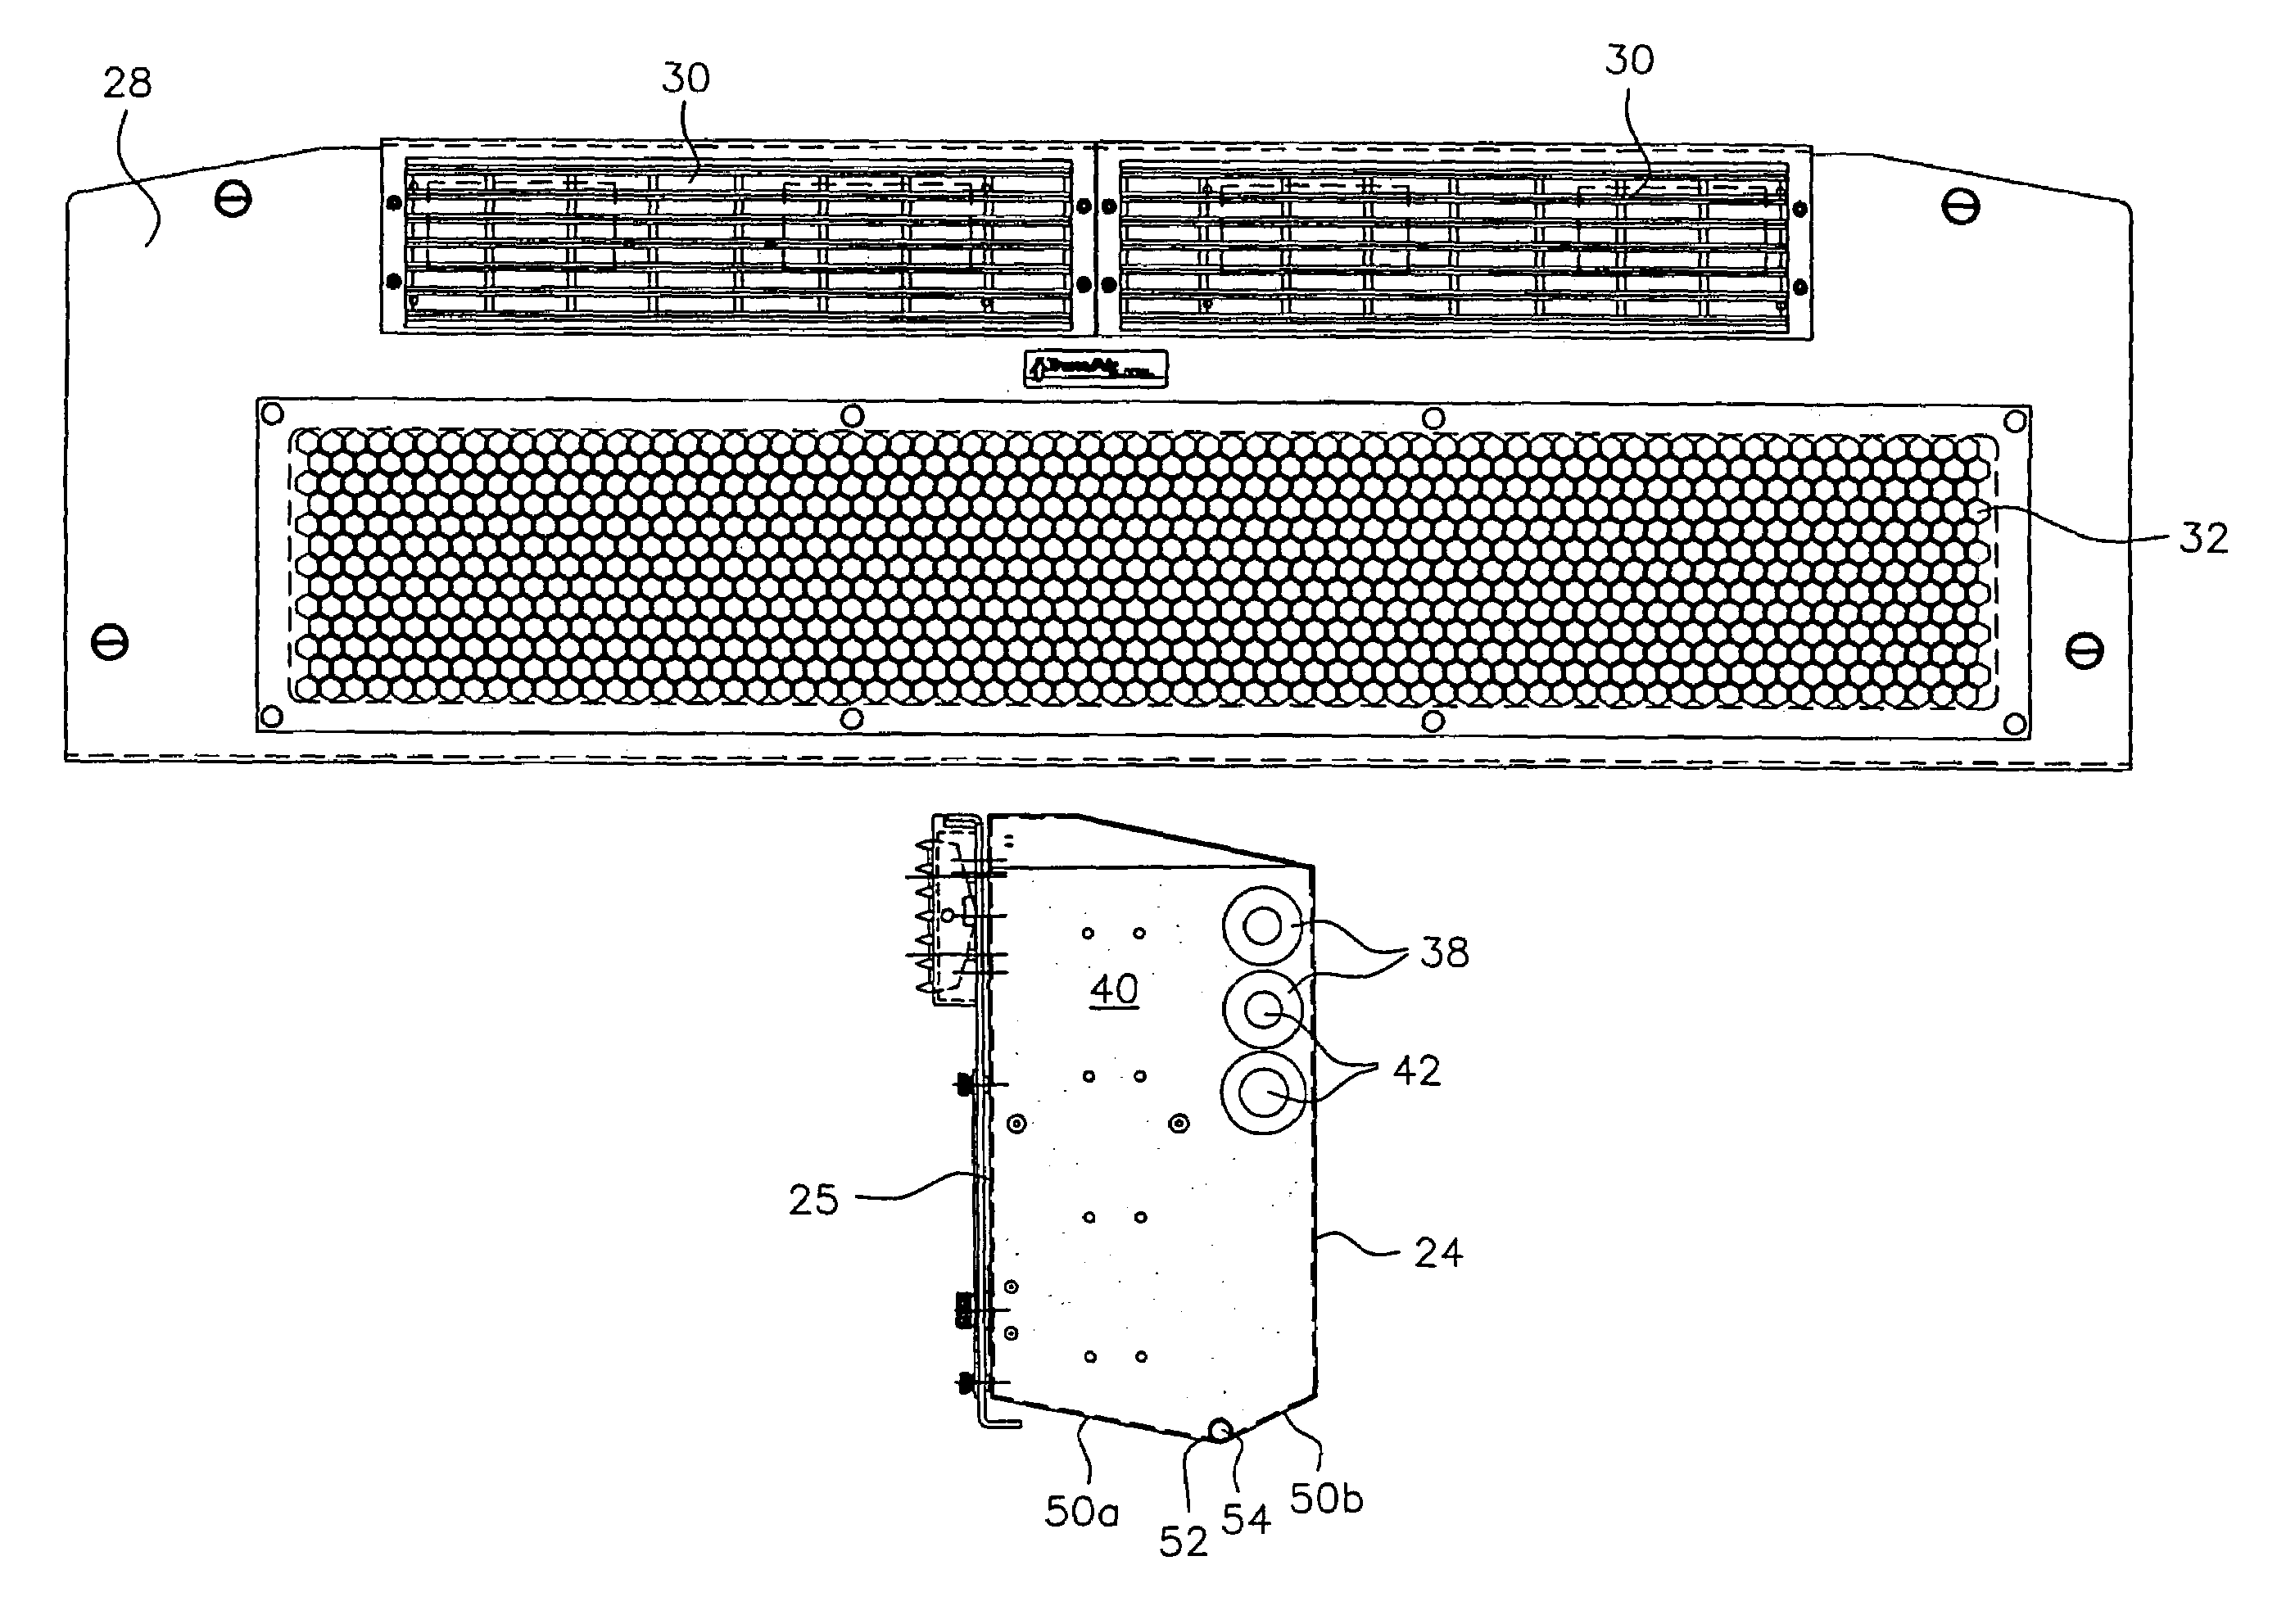 Self-contained flush-mount bulkhead air conditioning unit with novel evaporator/blower assembly housing